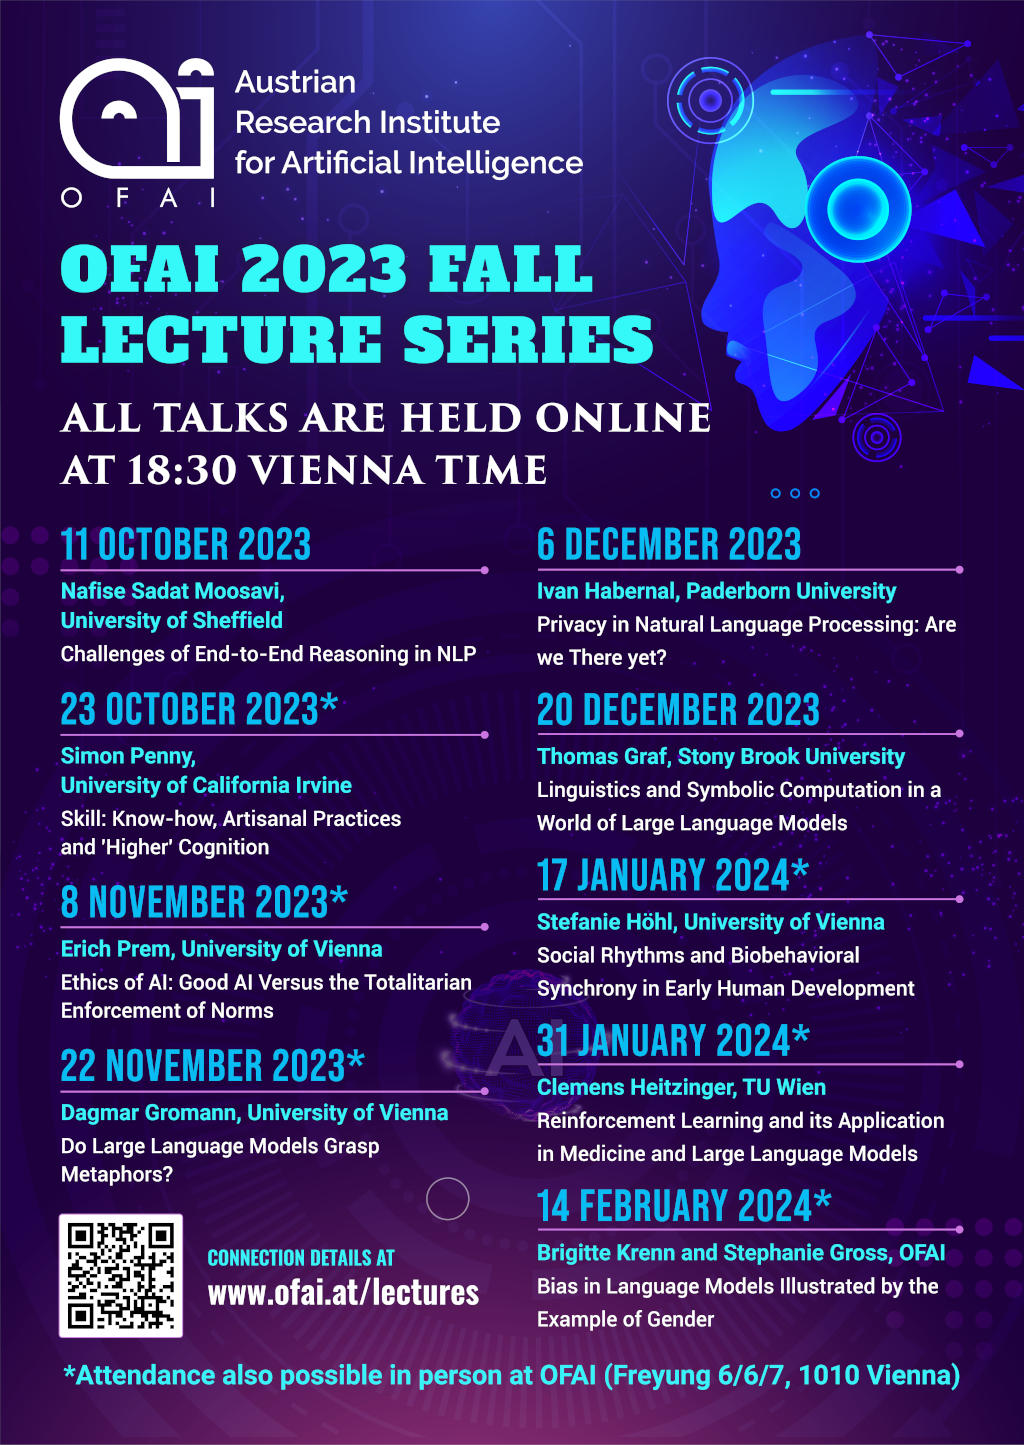 OFAI 2023 Fall Lecture Series poster